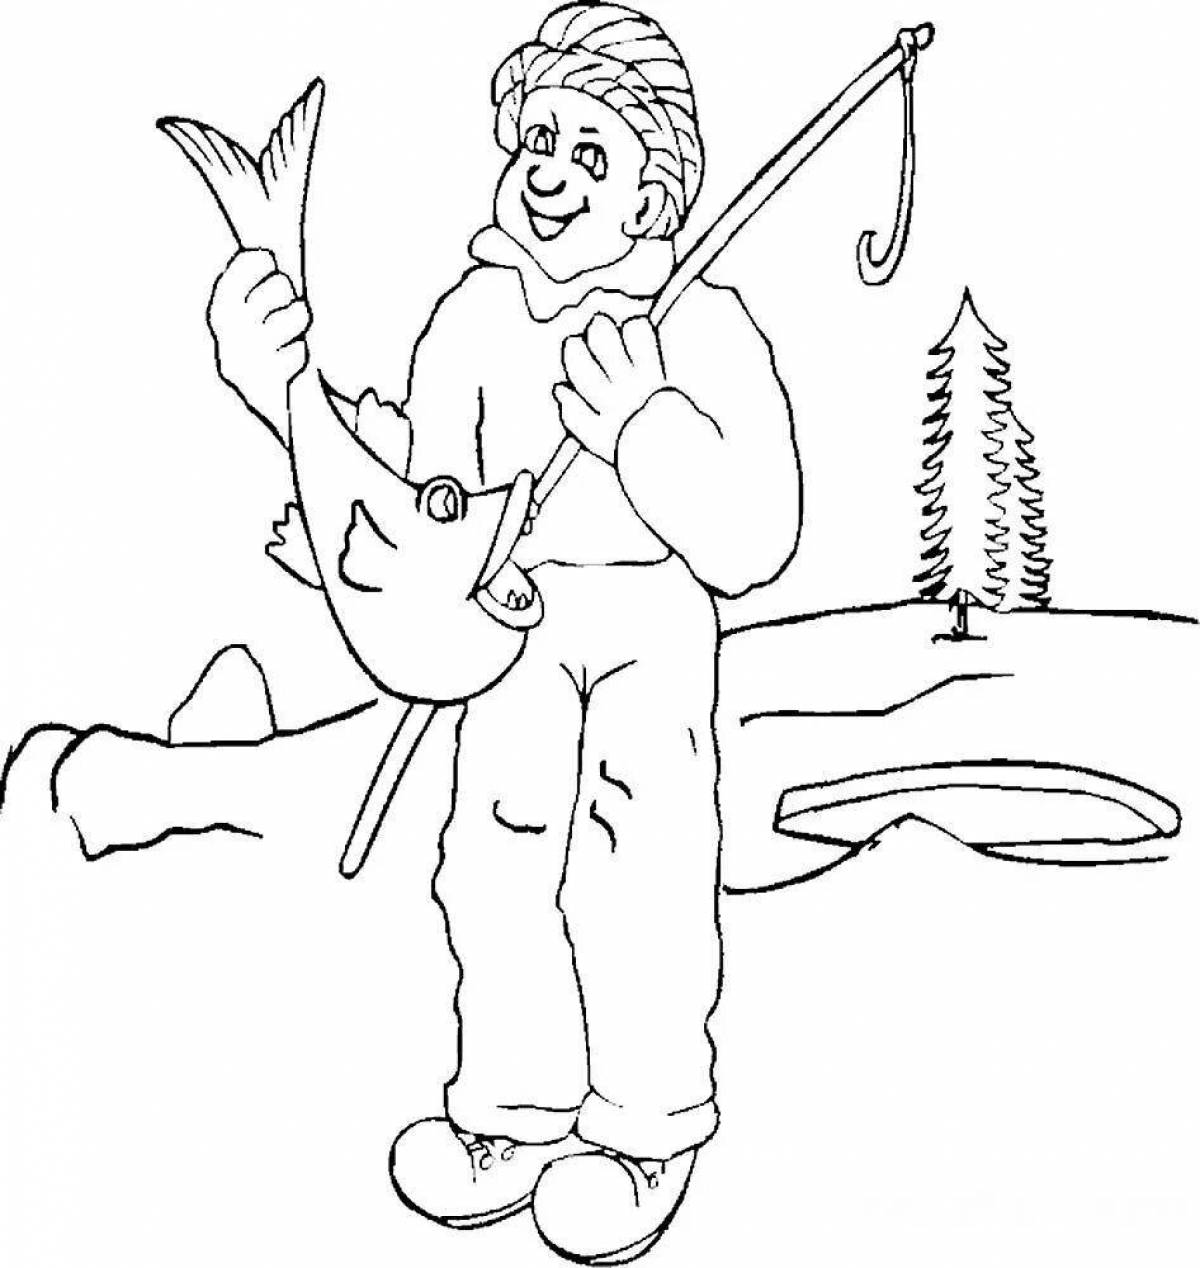 A fun coloring book for kids with a fisherman